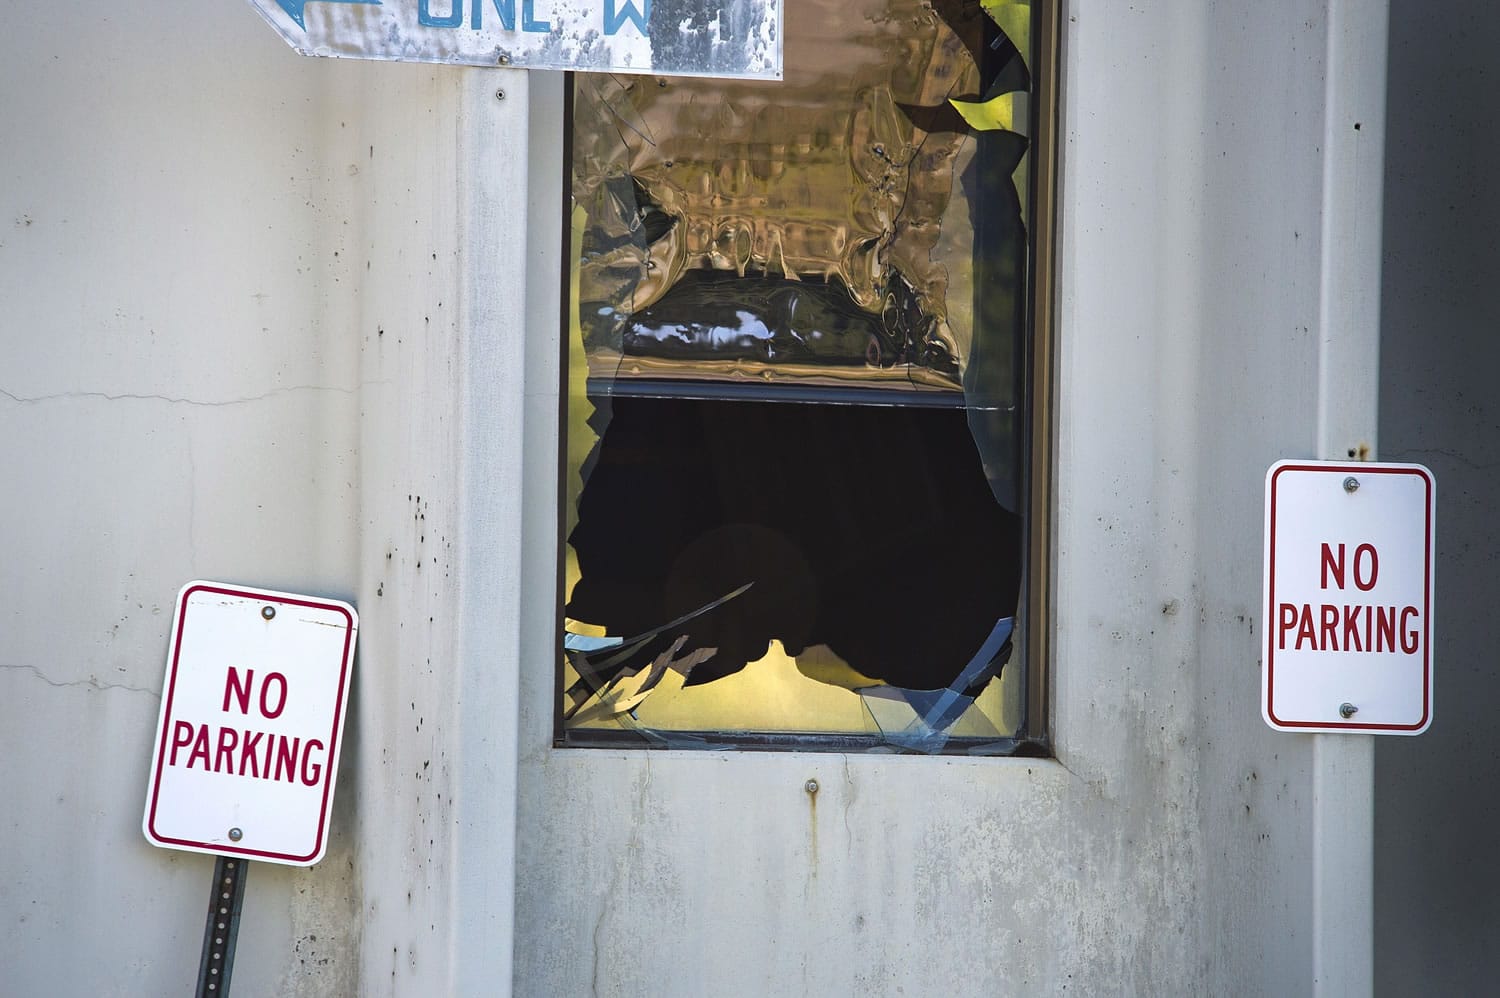 An explosion shattered windows and damaged loading docks at the Zodiac Aerospace plant Wednesday in Newport.